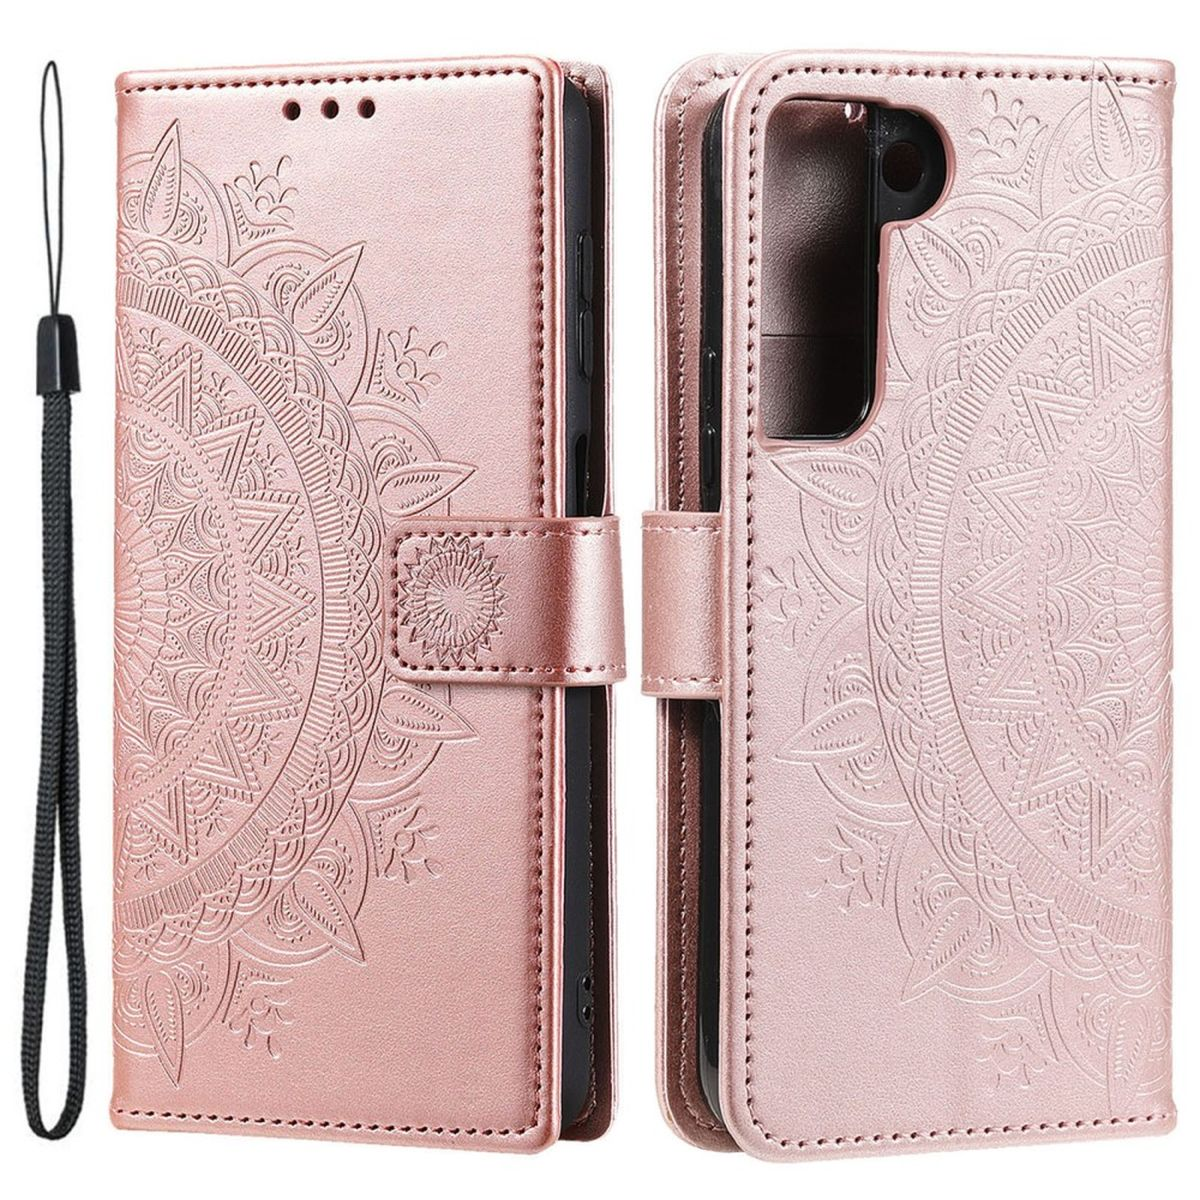 COVERKINGZ Klapphülle mit Mandala Muster, Rosegold Galaxy 5G, S22 Samsung, Bookcover